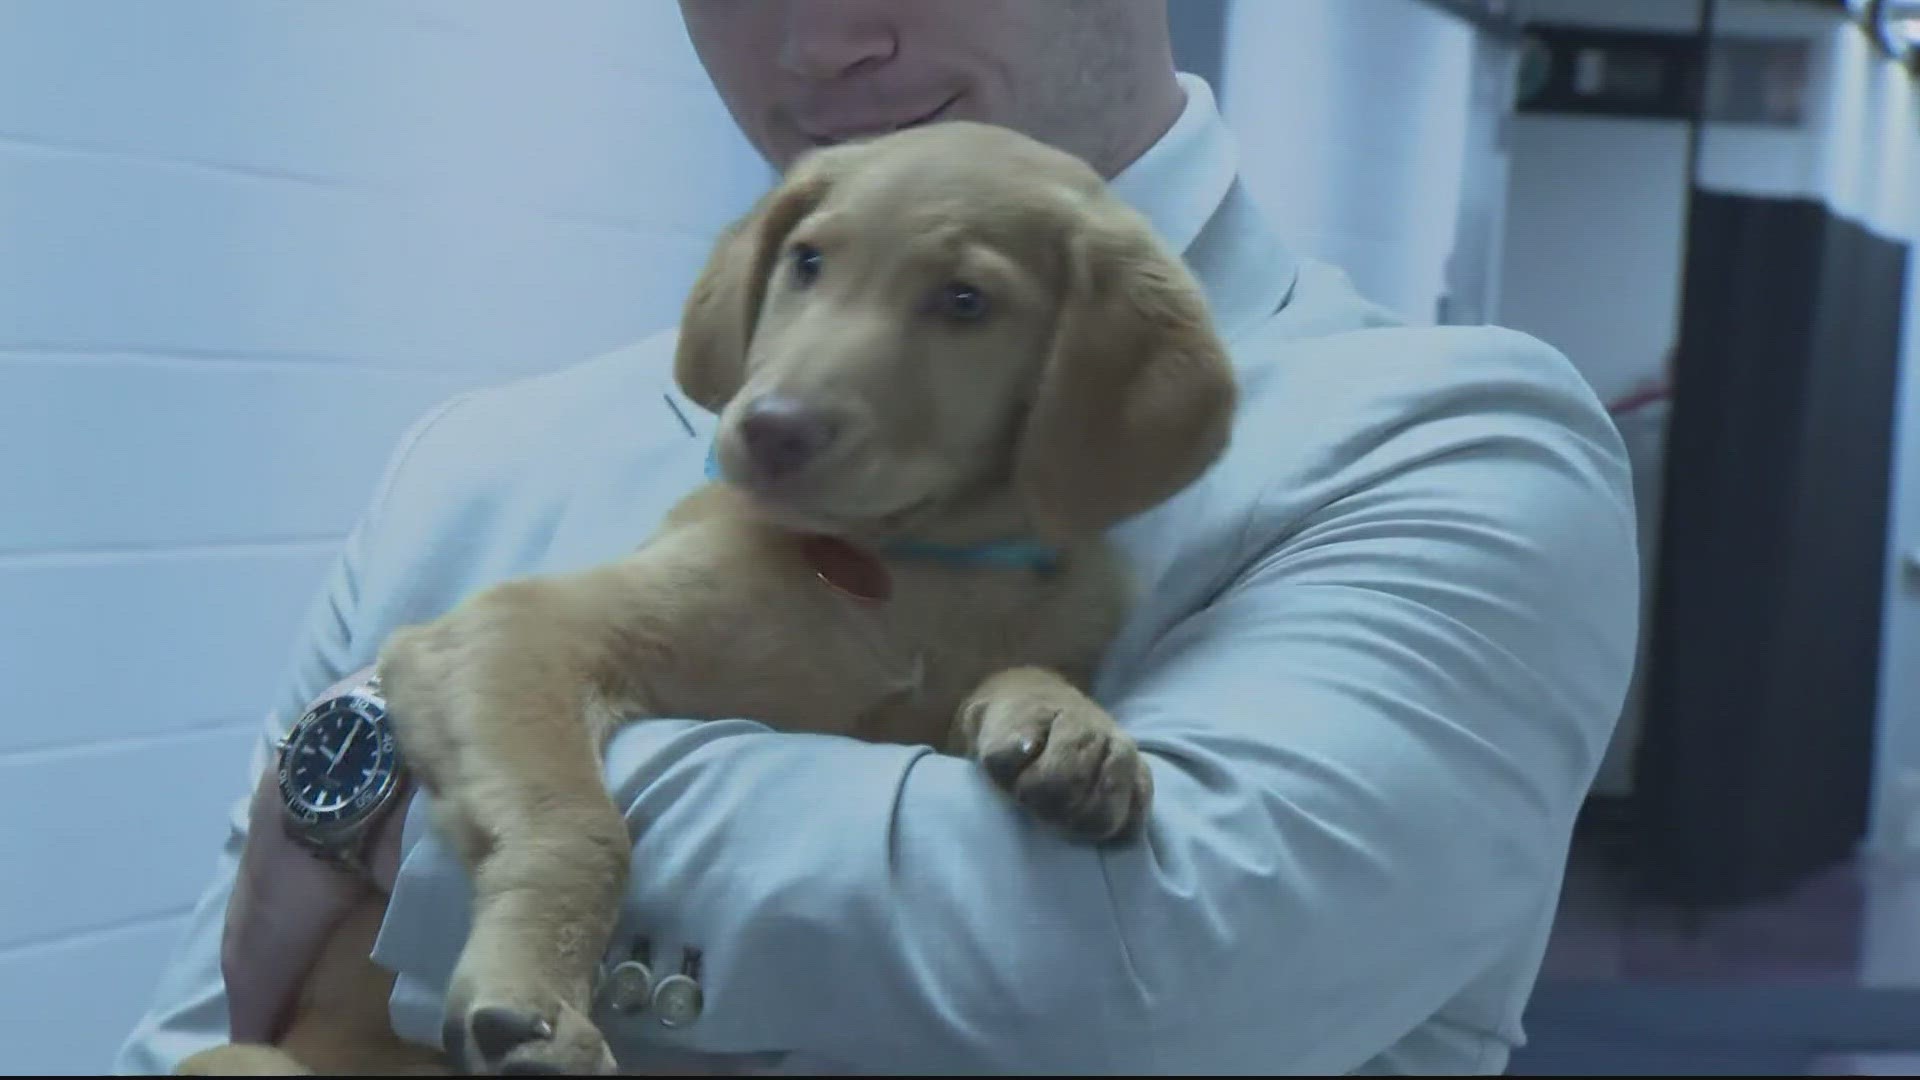 The Washington Capitals are helping some cute puppies find their forever home.